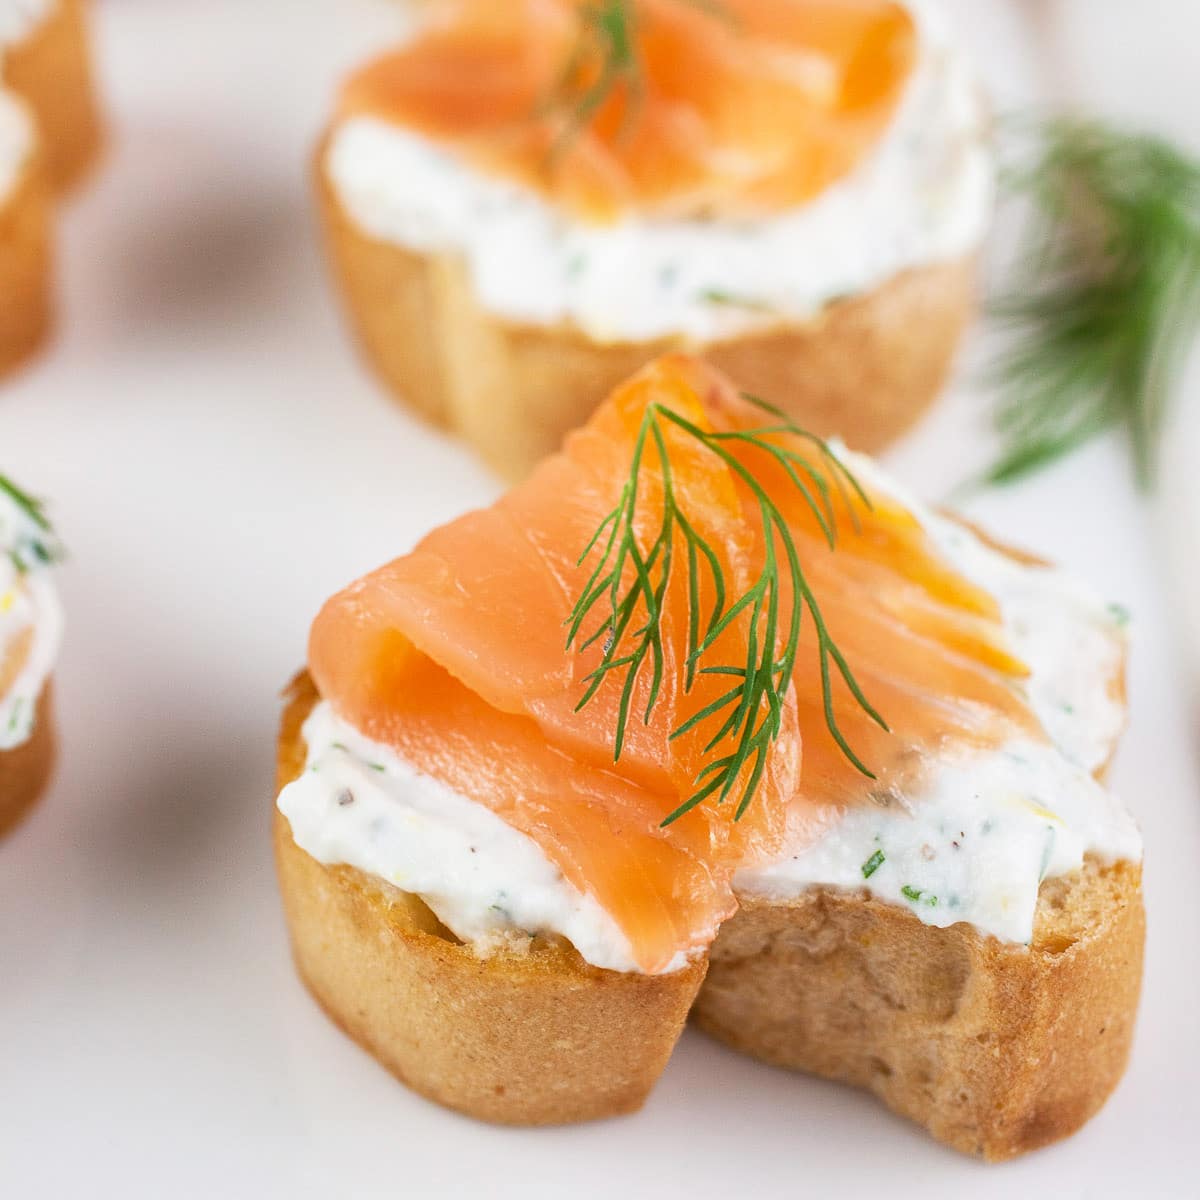 Gluten Free Tartlets with Hot Smoked Salmon and Cream Cheese